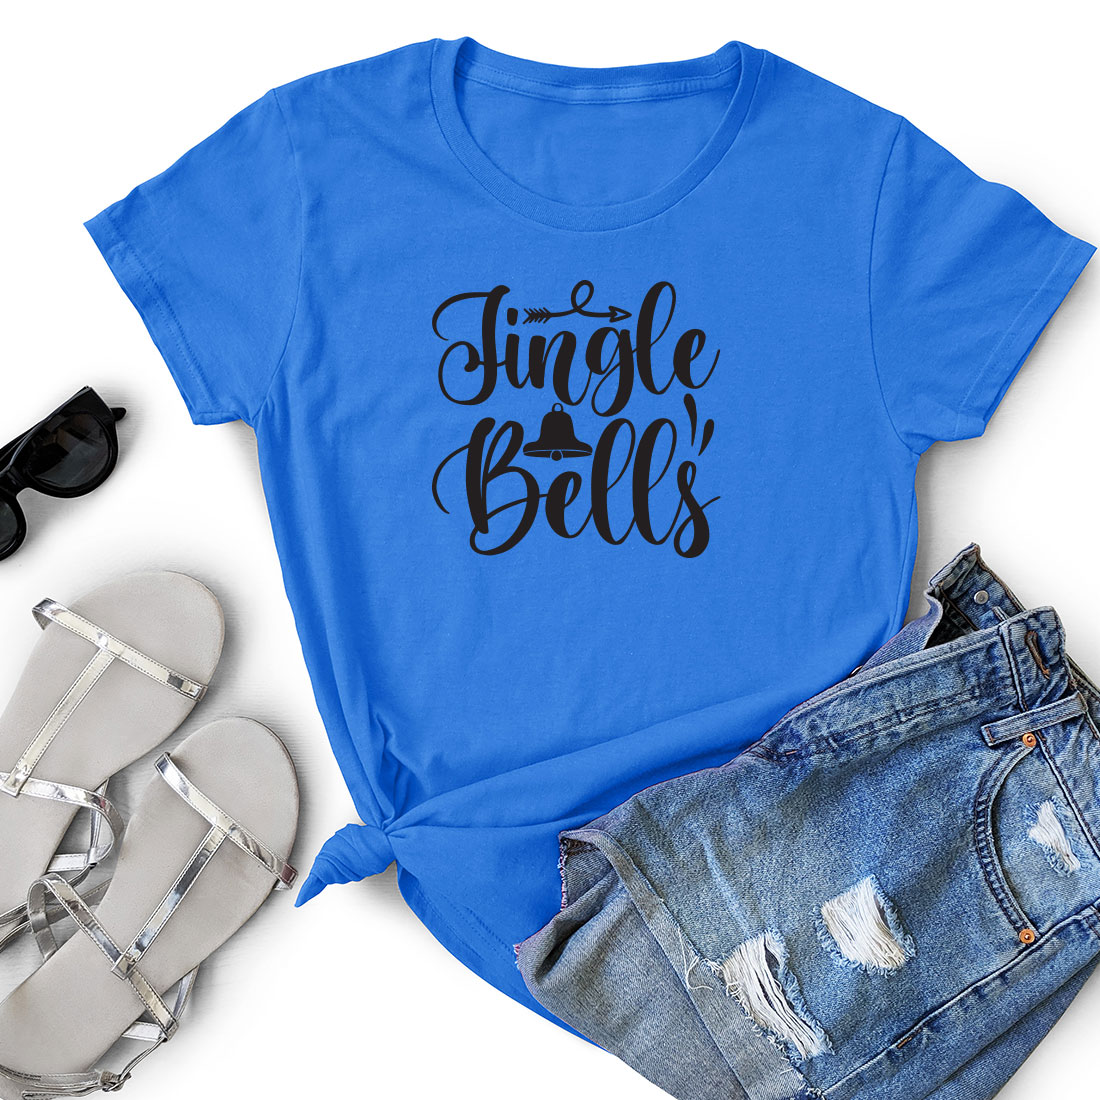 T - shirt that says single bell's next to a pair of shorts.